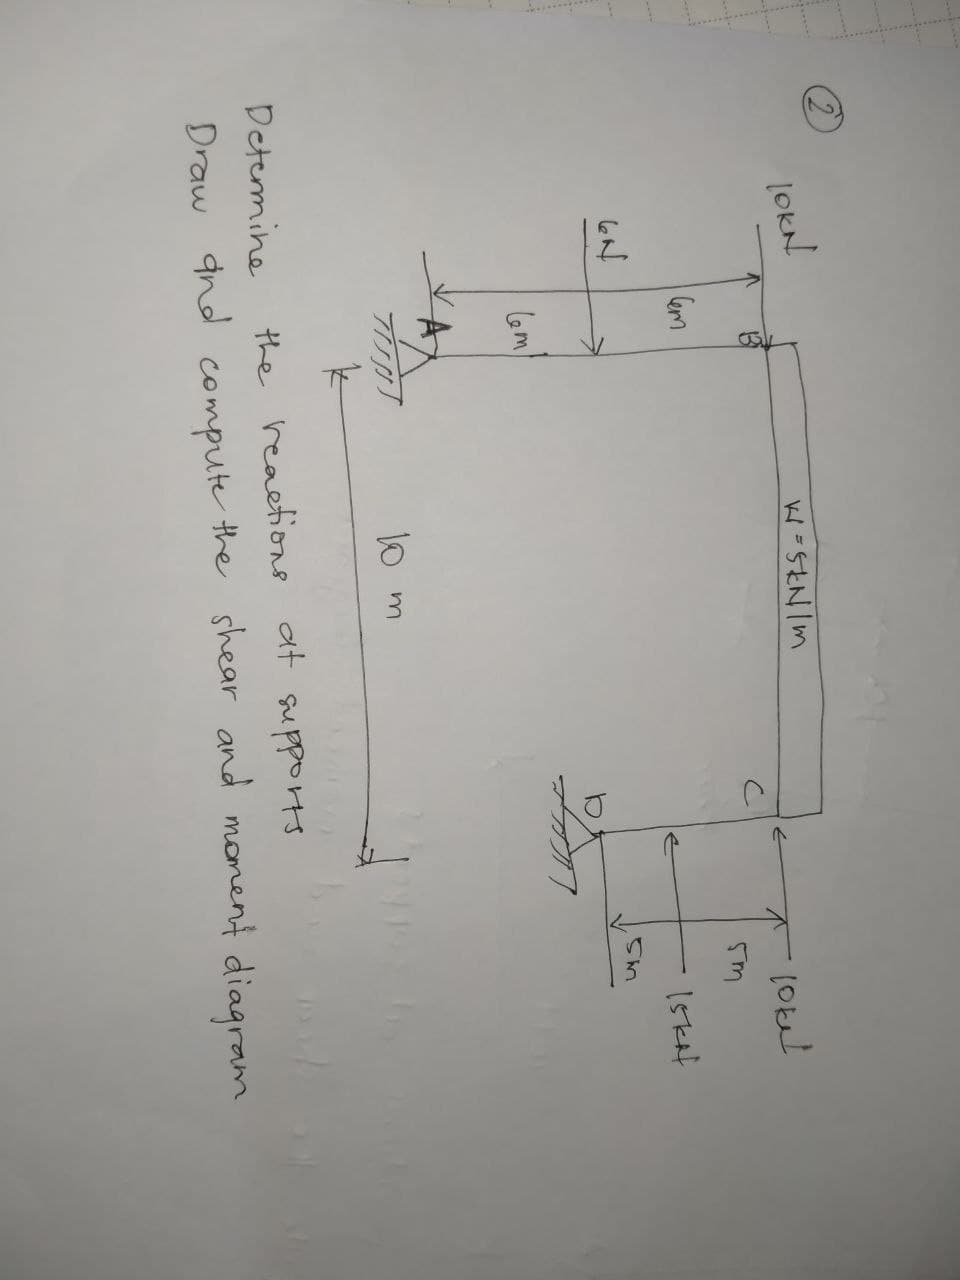 2
JOKN
6N
Cem
&
TUOT
w=5kN/m
10 m
D
lokel
5m
5m
Iskal
Determine
the reactions at supports
Draw and compute the shear and moment diagram